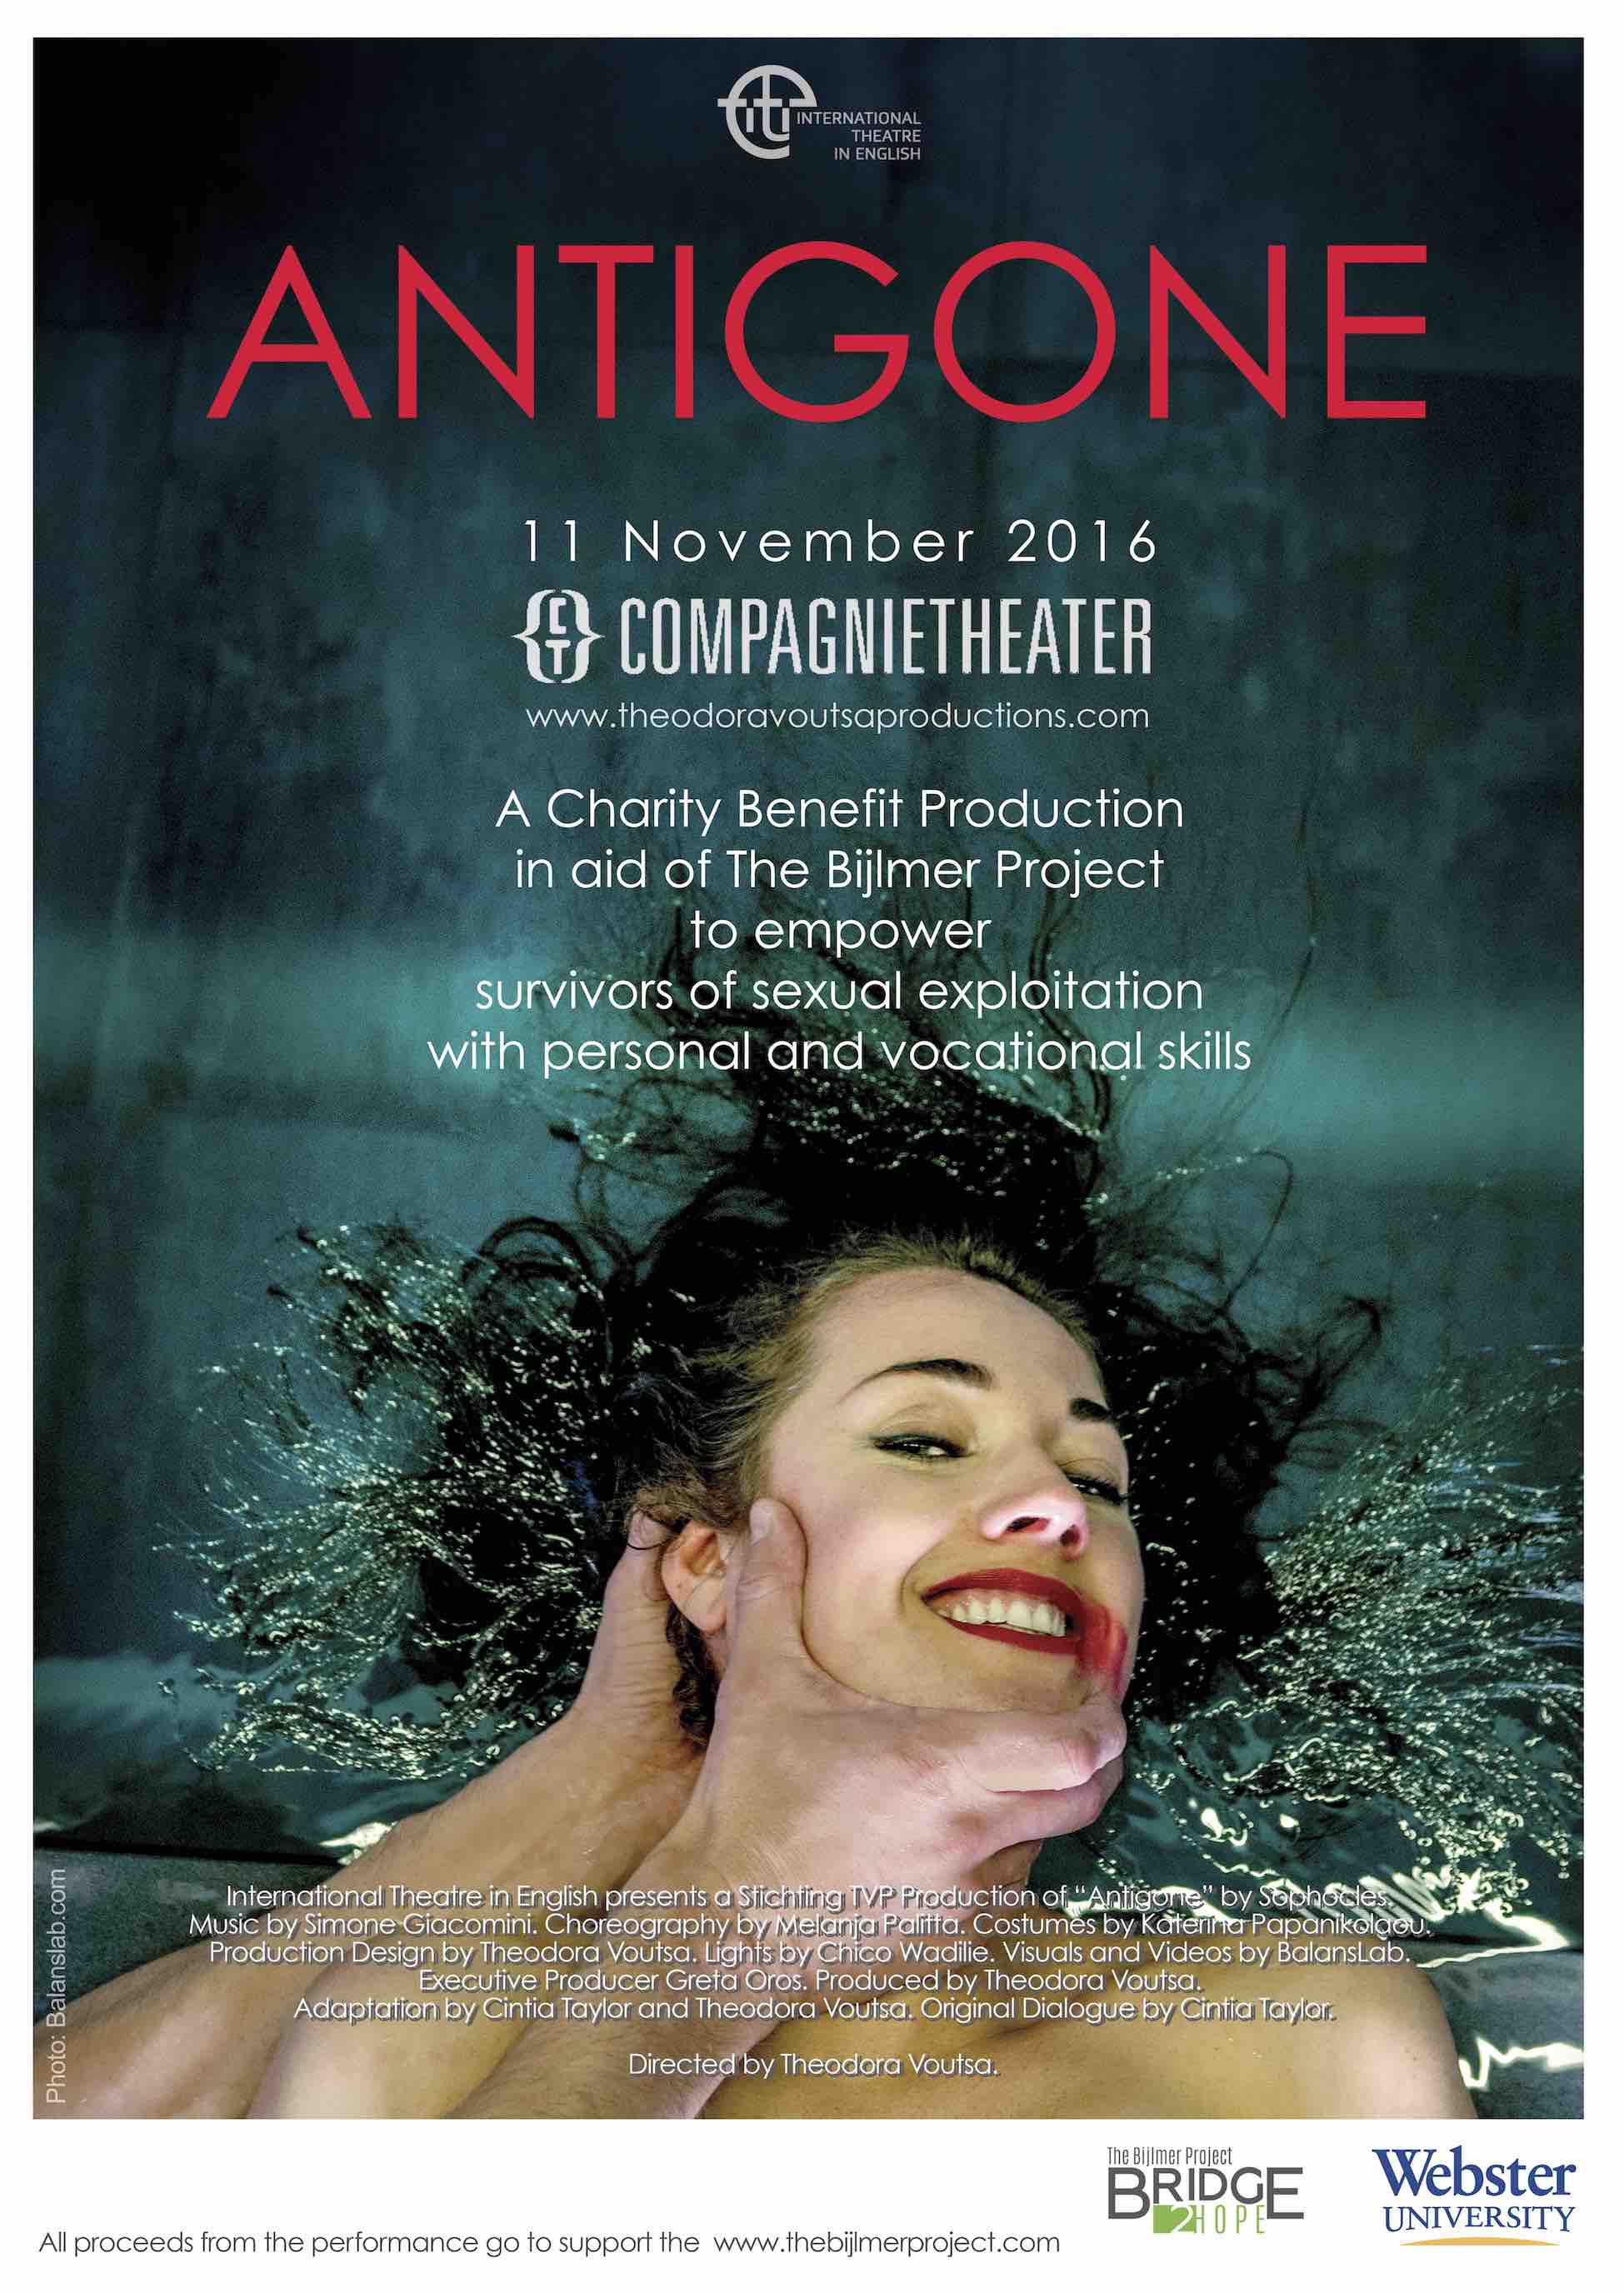 ANTIGONE - a Charity Benefit Production ~ 11 November 2016<br /><p>Many thanks to the International Theatre in English for their generosity in donating all proceeds for this production of ANTIGONE to TheBridge2Hope Foundation (formerly named: The Bijlmer Project) and many thanks to everyone who came to see this impressive play.</p>
<p>Antigone is a tragedy written by Sophocles in the year 441 BCE.</p>
<p>The new King Creon is desperate to gain control over a city ravaged by civil war and refuses to bury the body of Antigone’s rebellious brother. Outraged, she defies him and honours her brother. Creon takes action against her, risking the wrath of the gods.</p>
